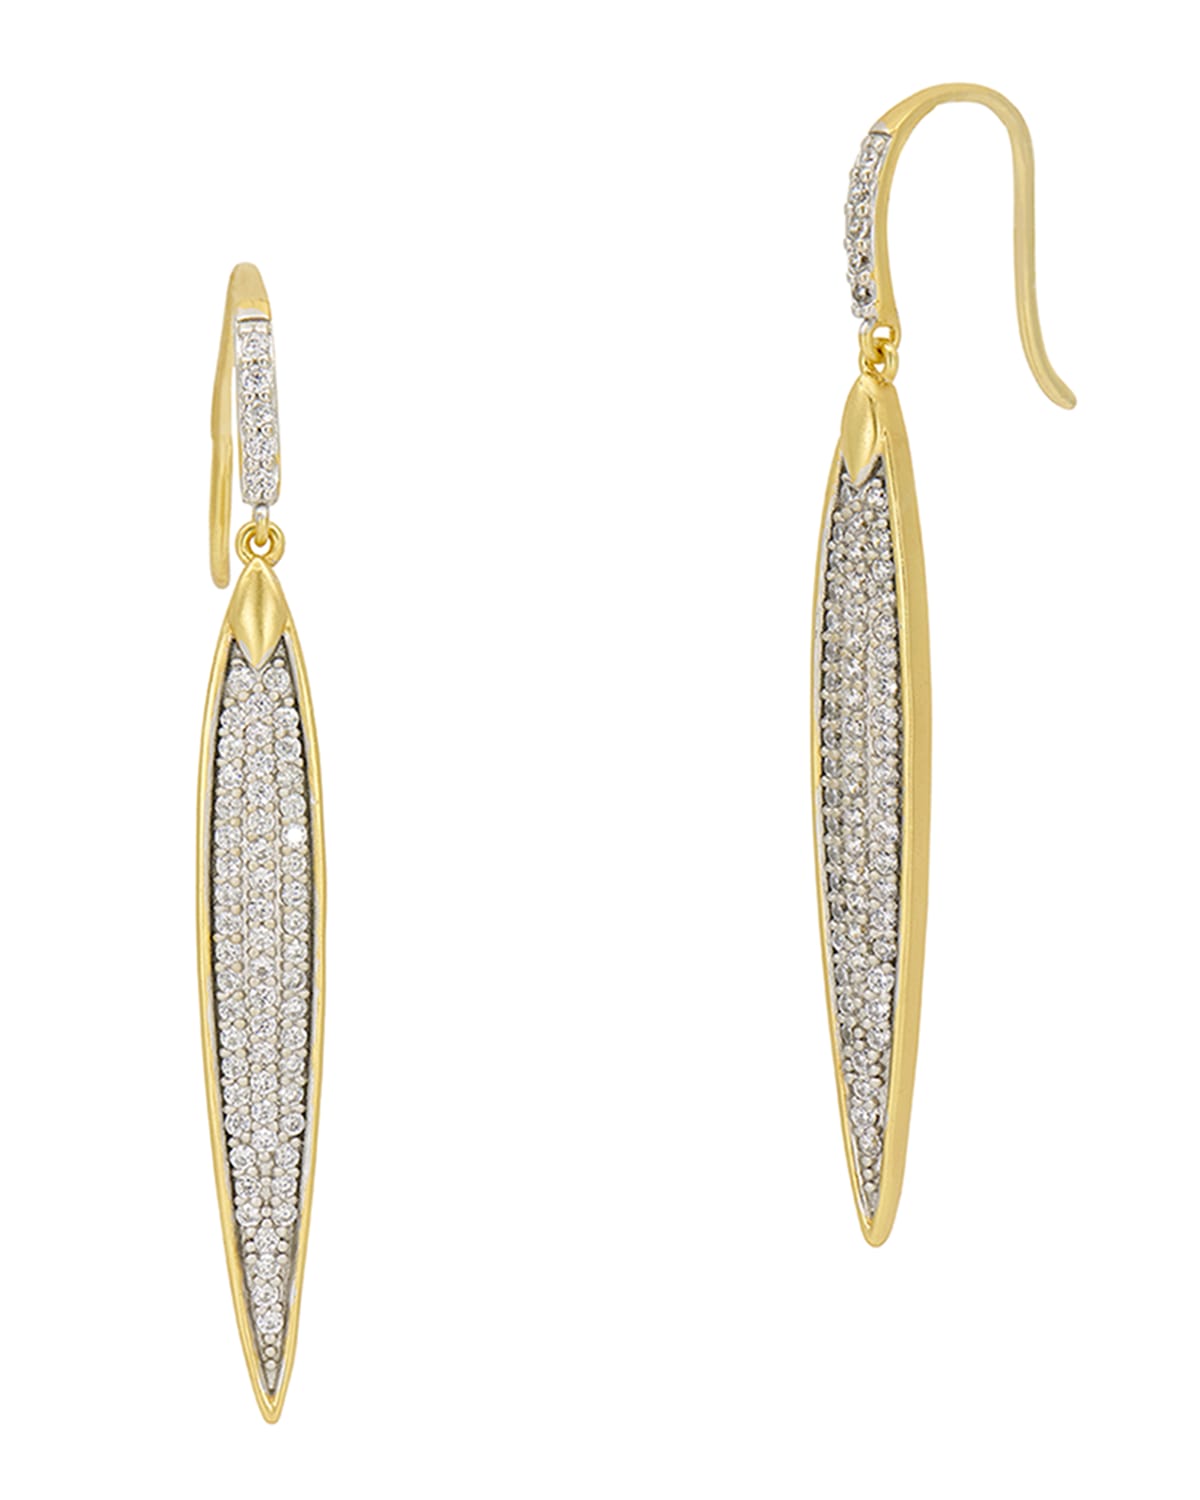 Freida Rothman Petals And Pave Large Earrings